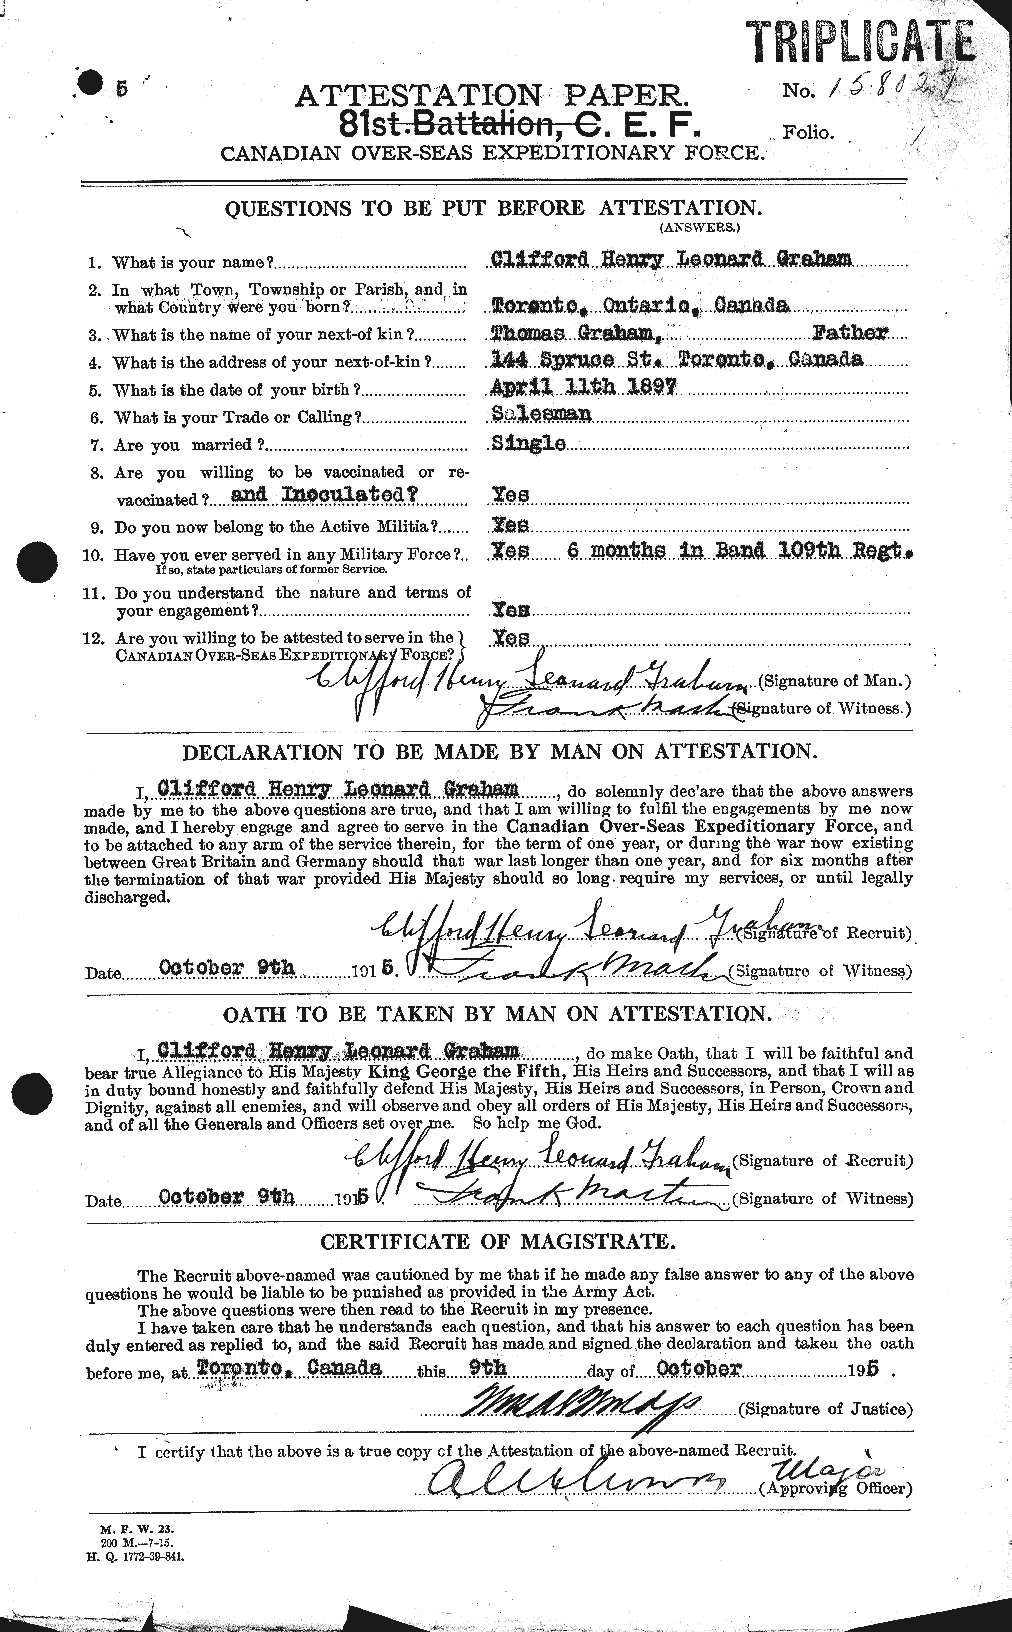 Personnel Records of the First World War - CEF 353798a